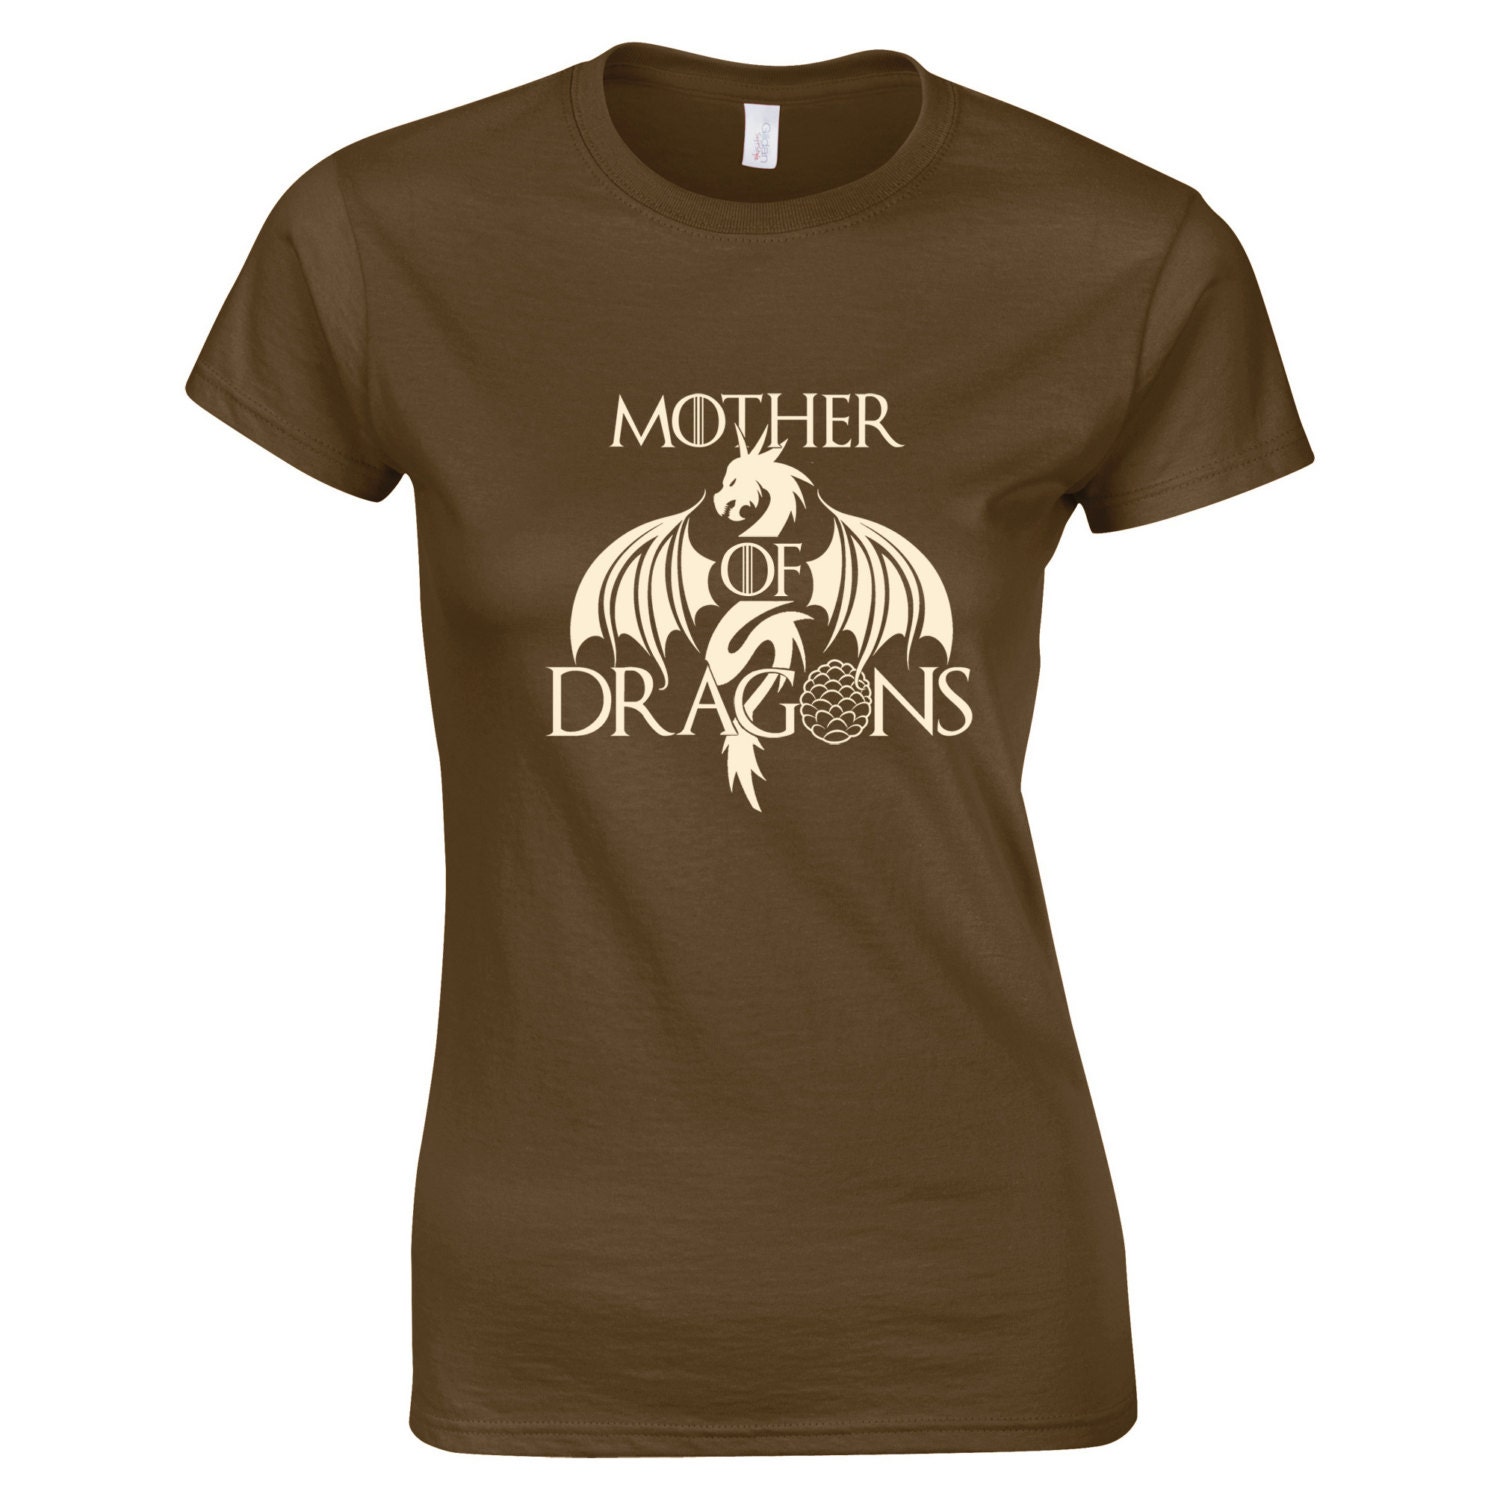 Mother of Dragons Shirt Womens Game of Thrones T-shirt